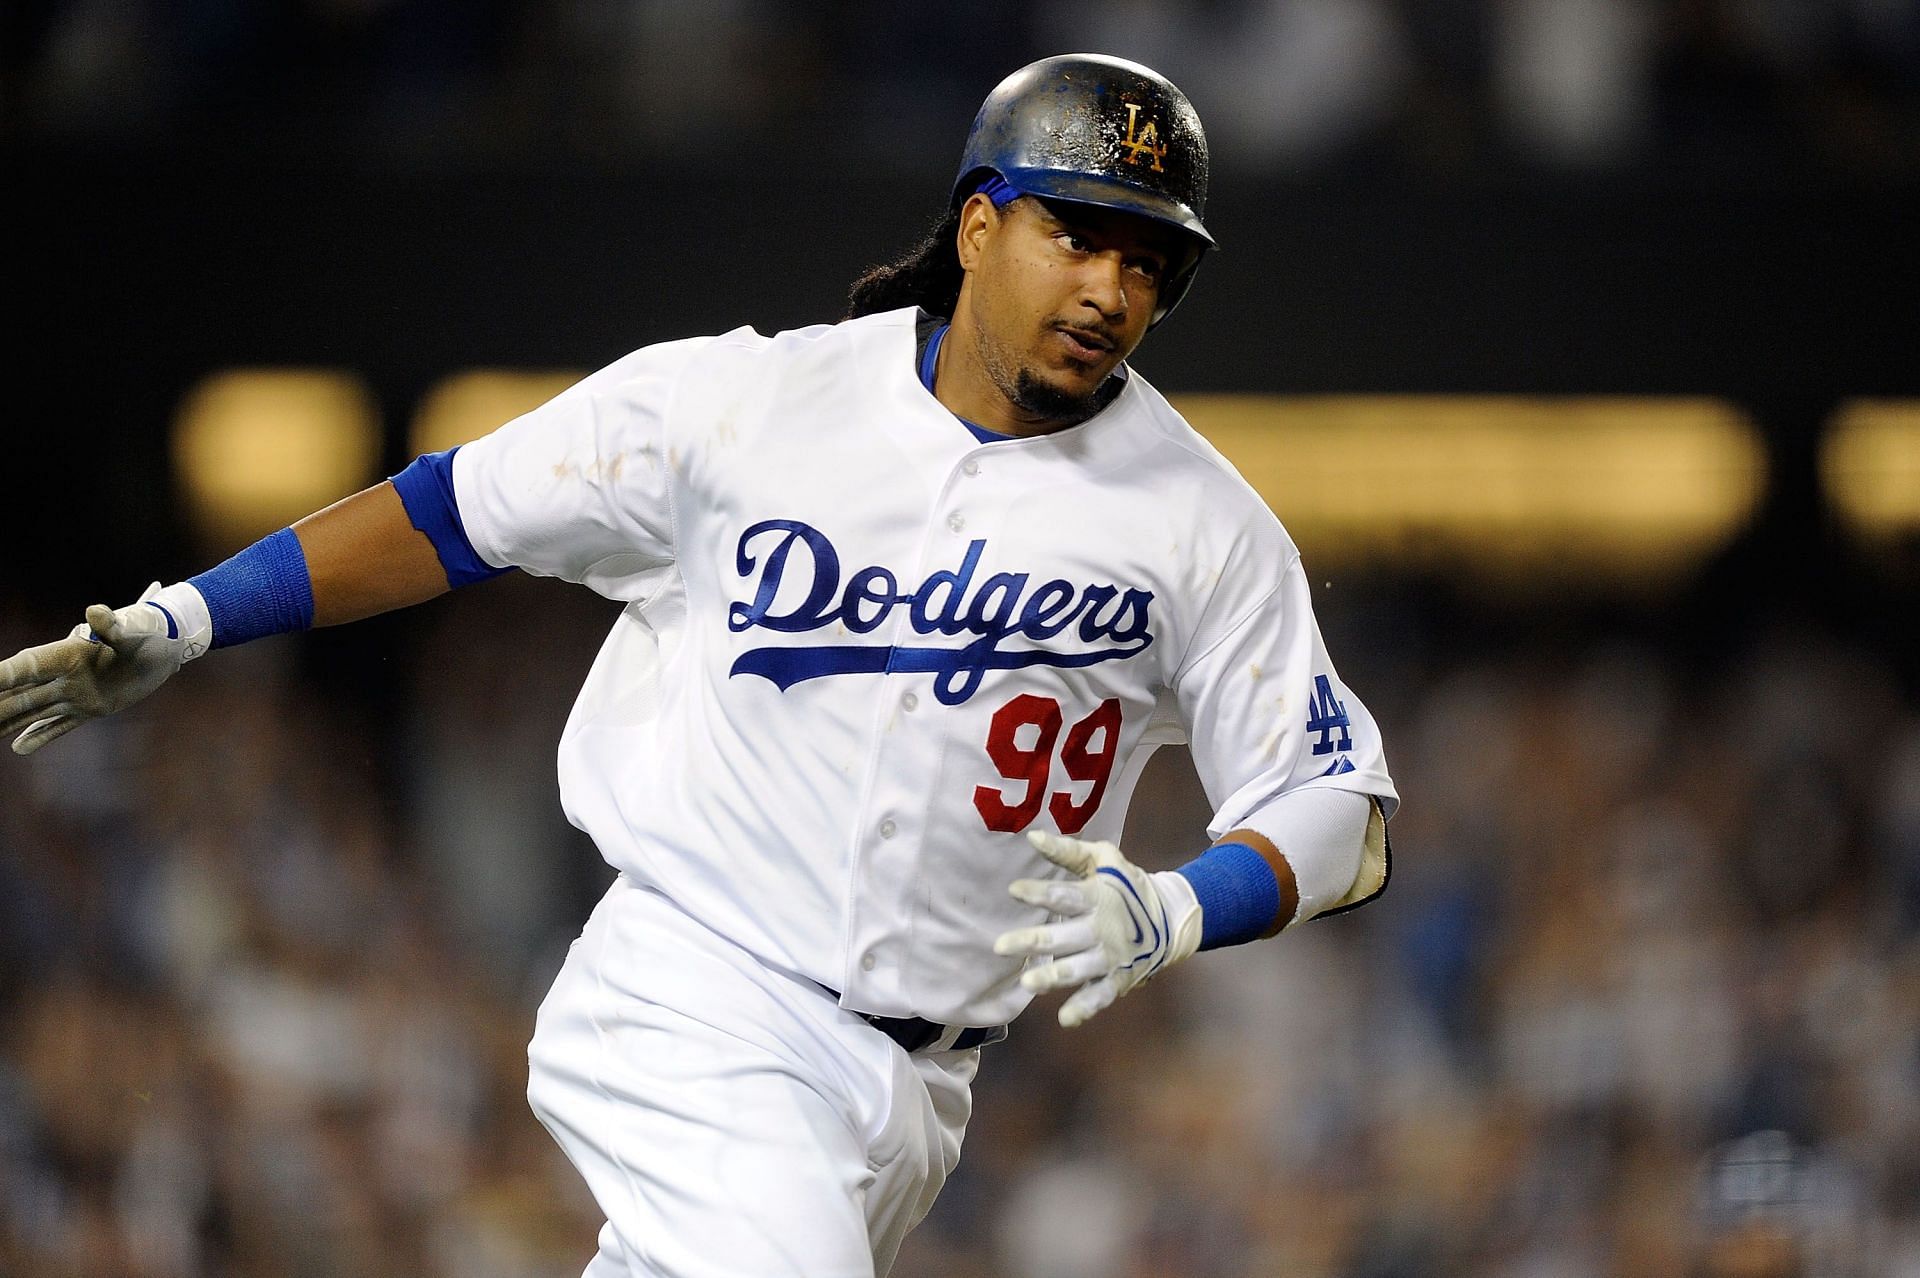 Will Former Red Sox Manny Ramirez Play Ball in New England Again?